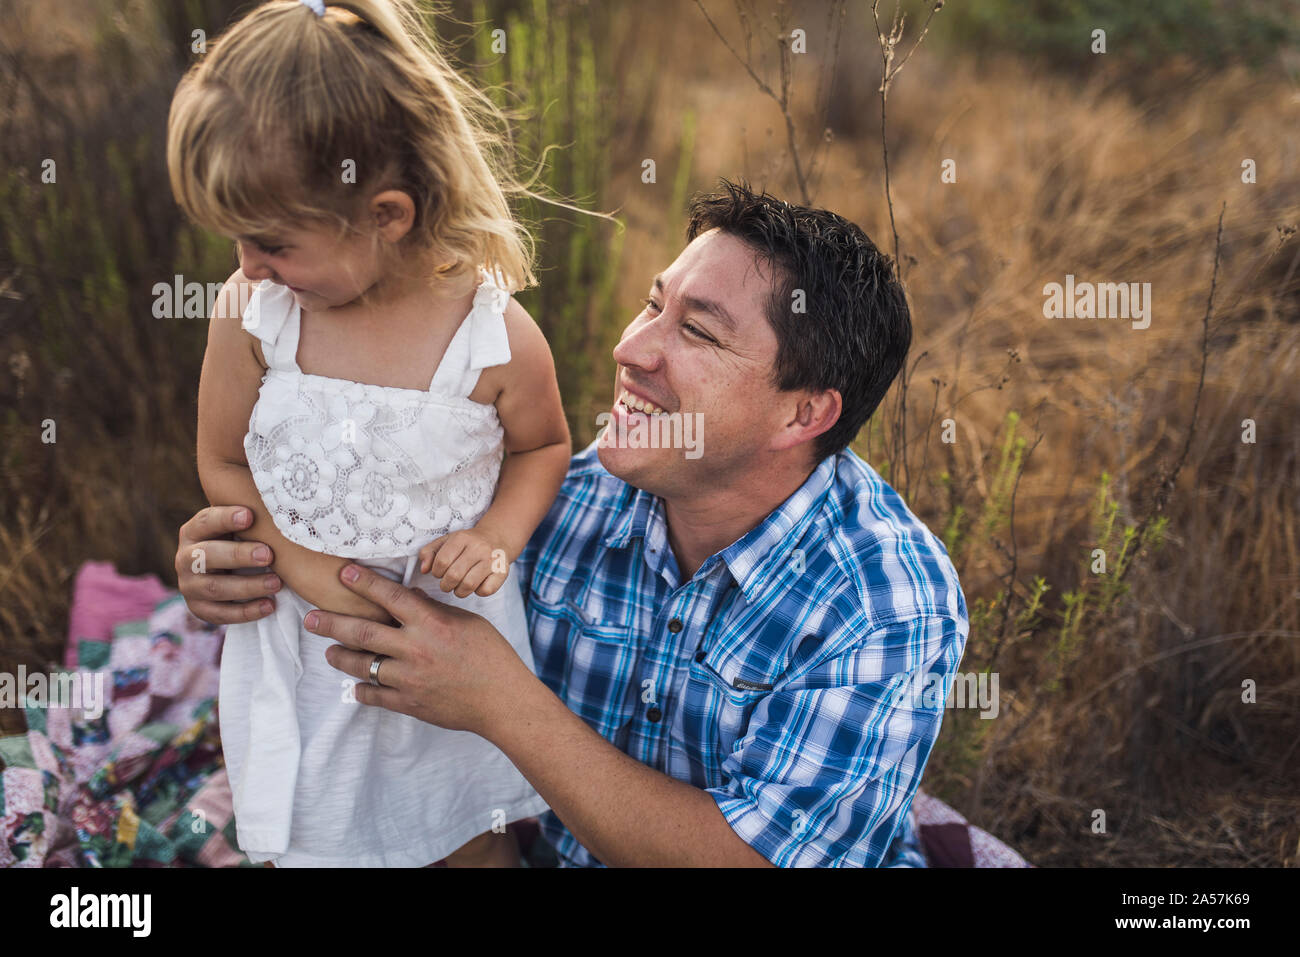 Dad smiling at 4 yr old daughter in sundress on quilt - B/W photo Stock Photo